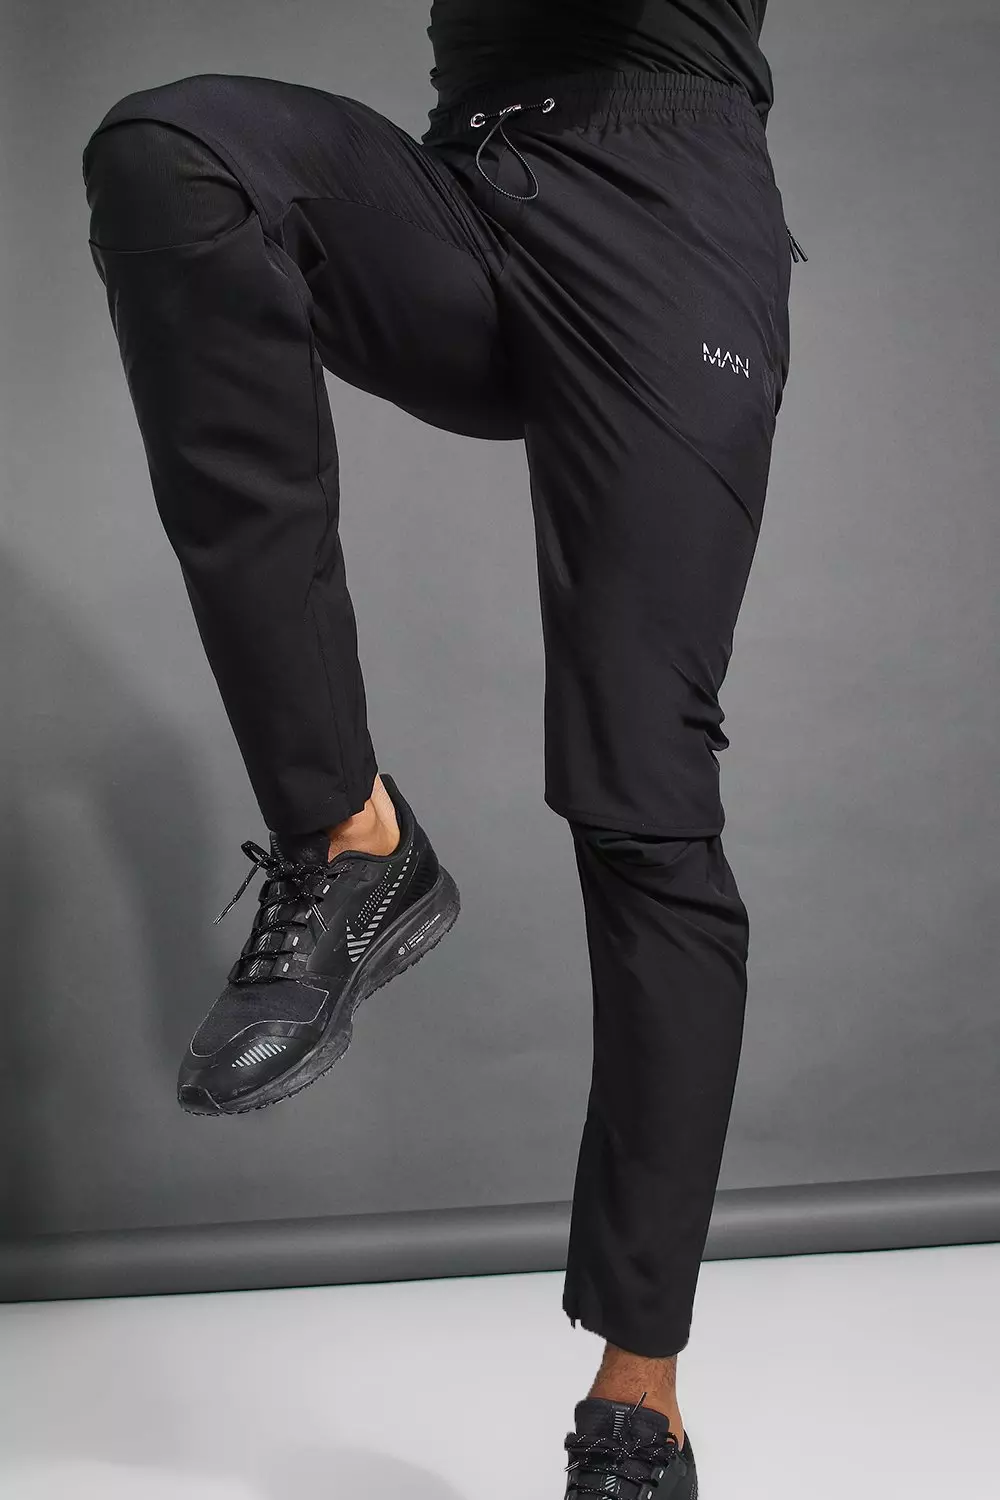 Men's Black Fitted Gym Joggers - Slim Fit Tracksuit Bottoms – Frontside  Sportswear